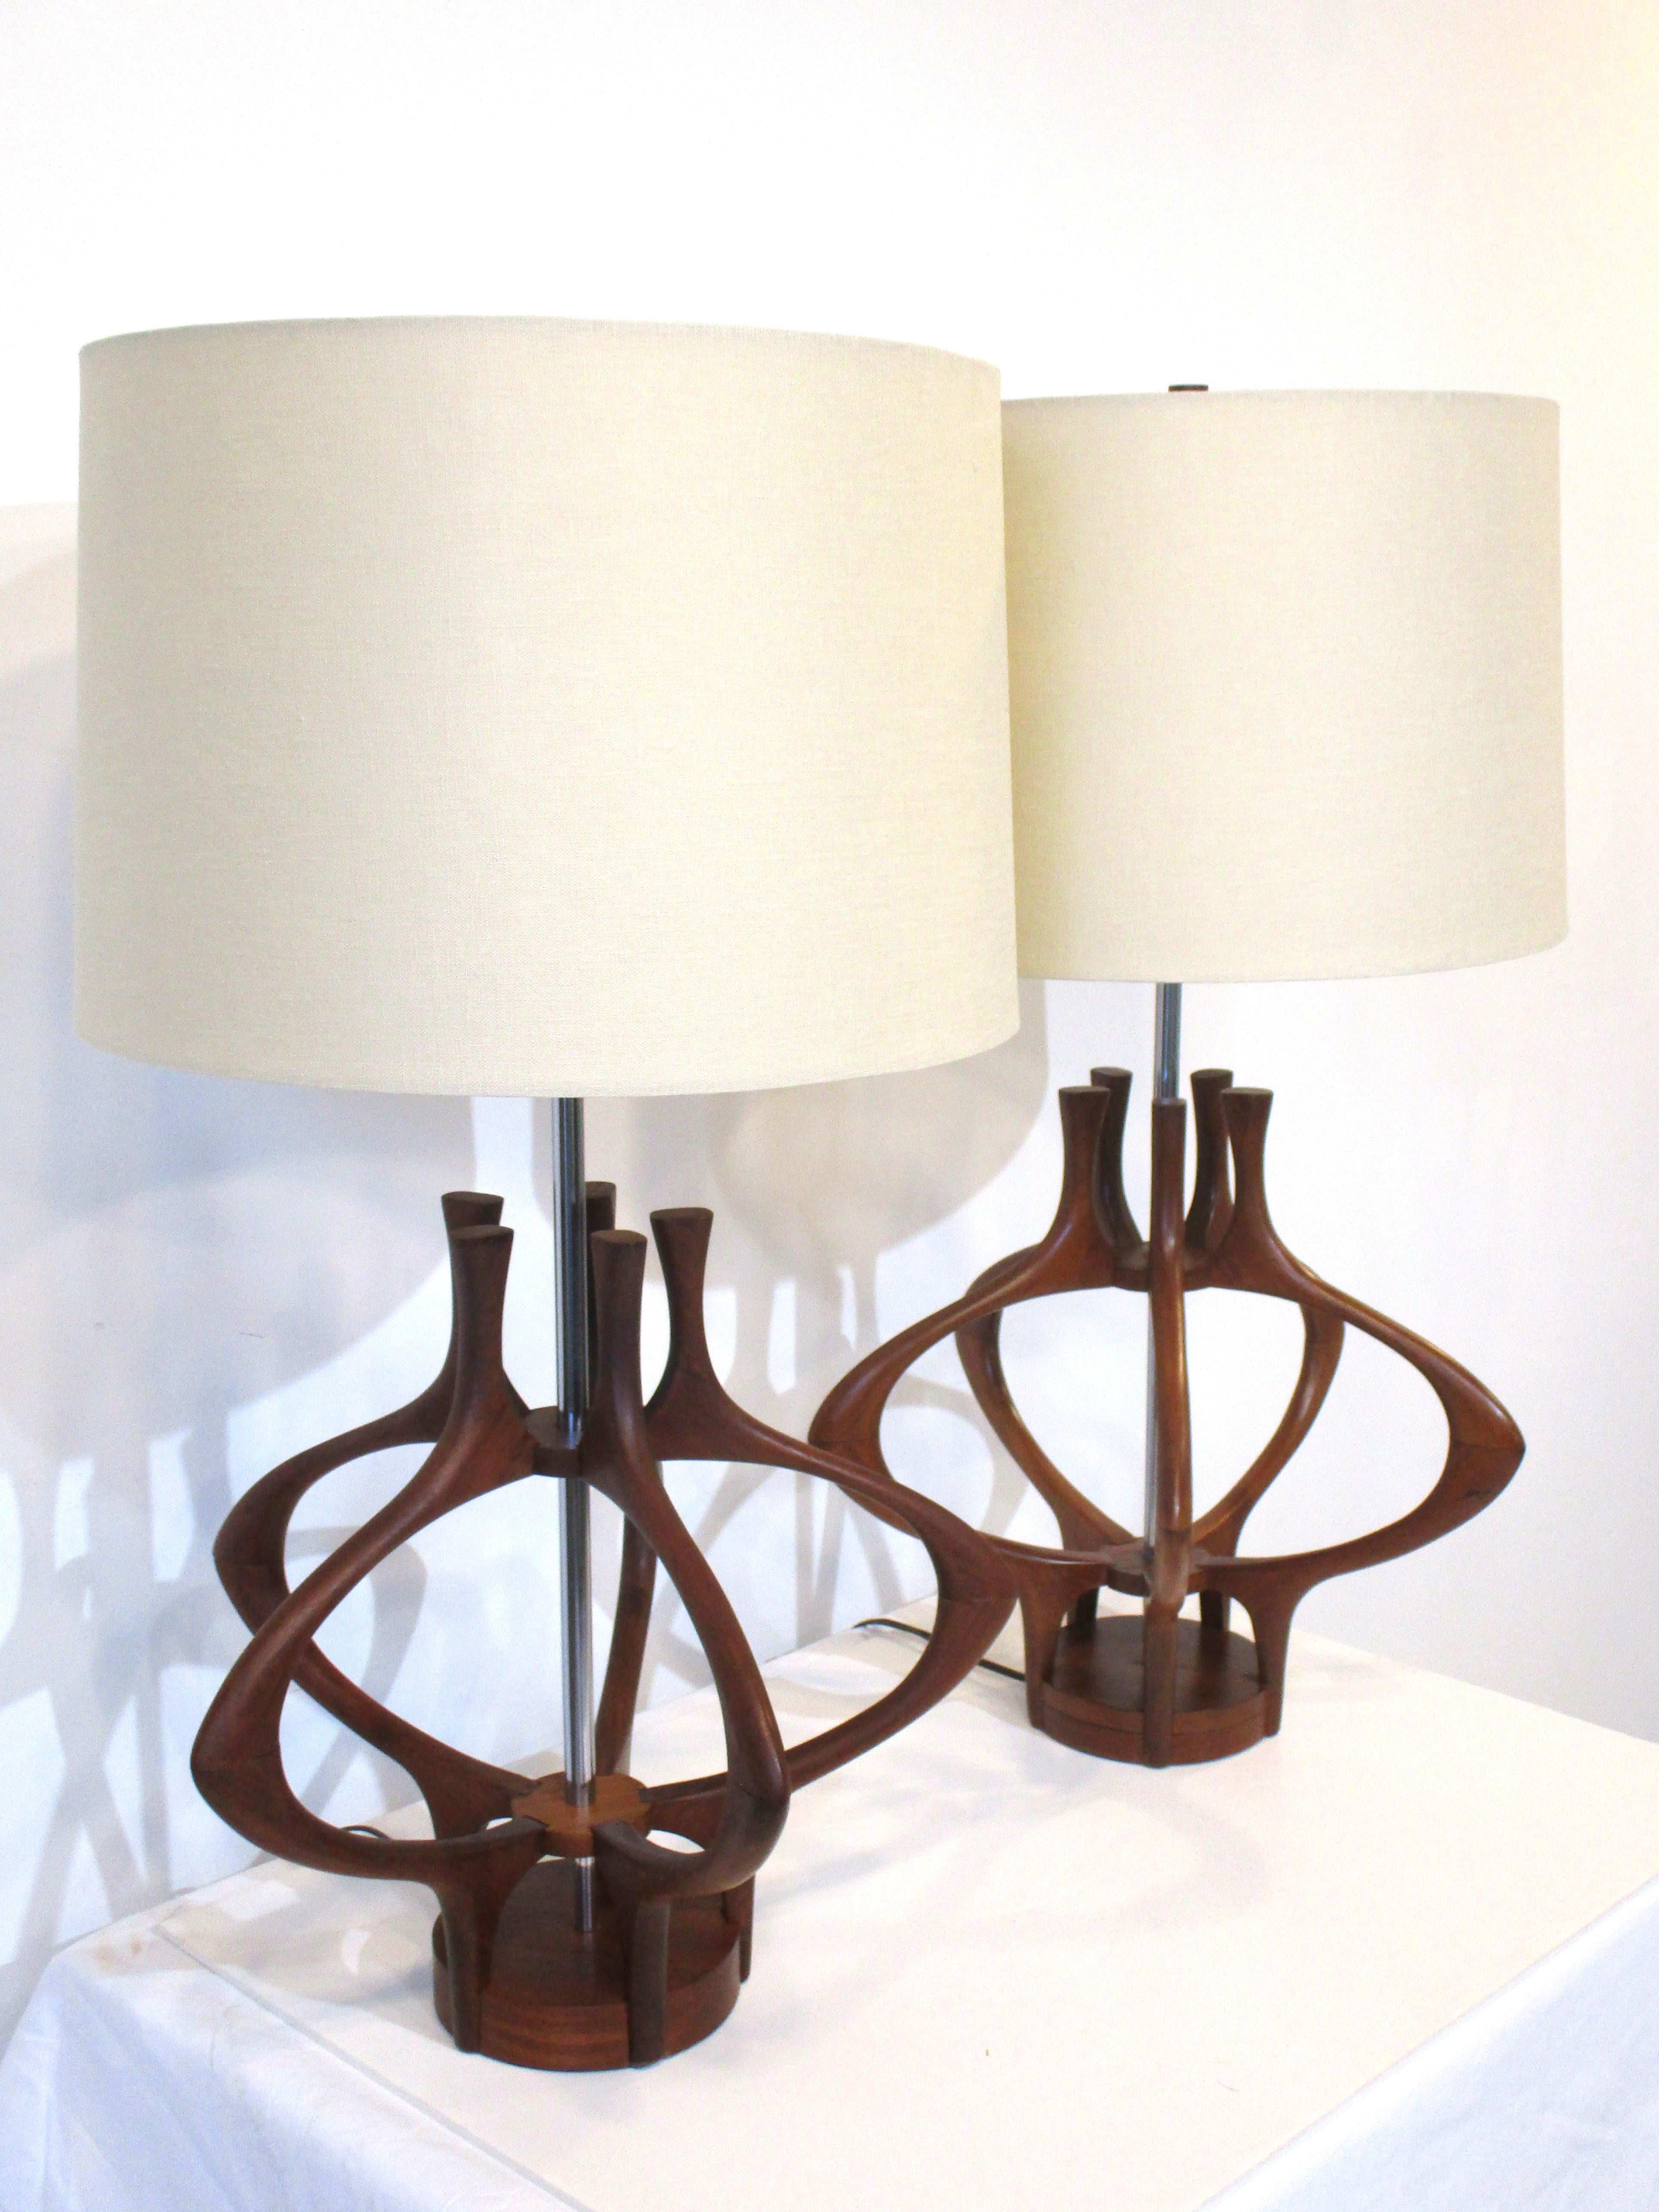 A pair of rare sculptural walnut table lamps with polished metal staff topped with cream toned linen shades. A stunning Danish styled design with the open body letting the light play with the form when lit, attributed to the Modeline Lighting